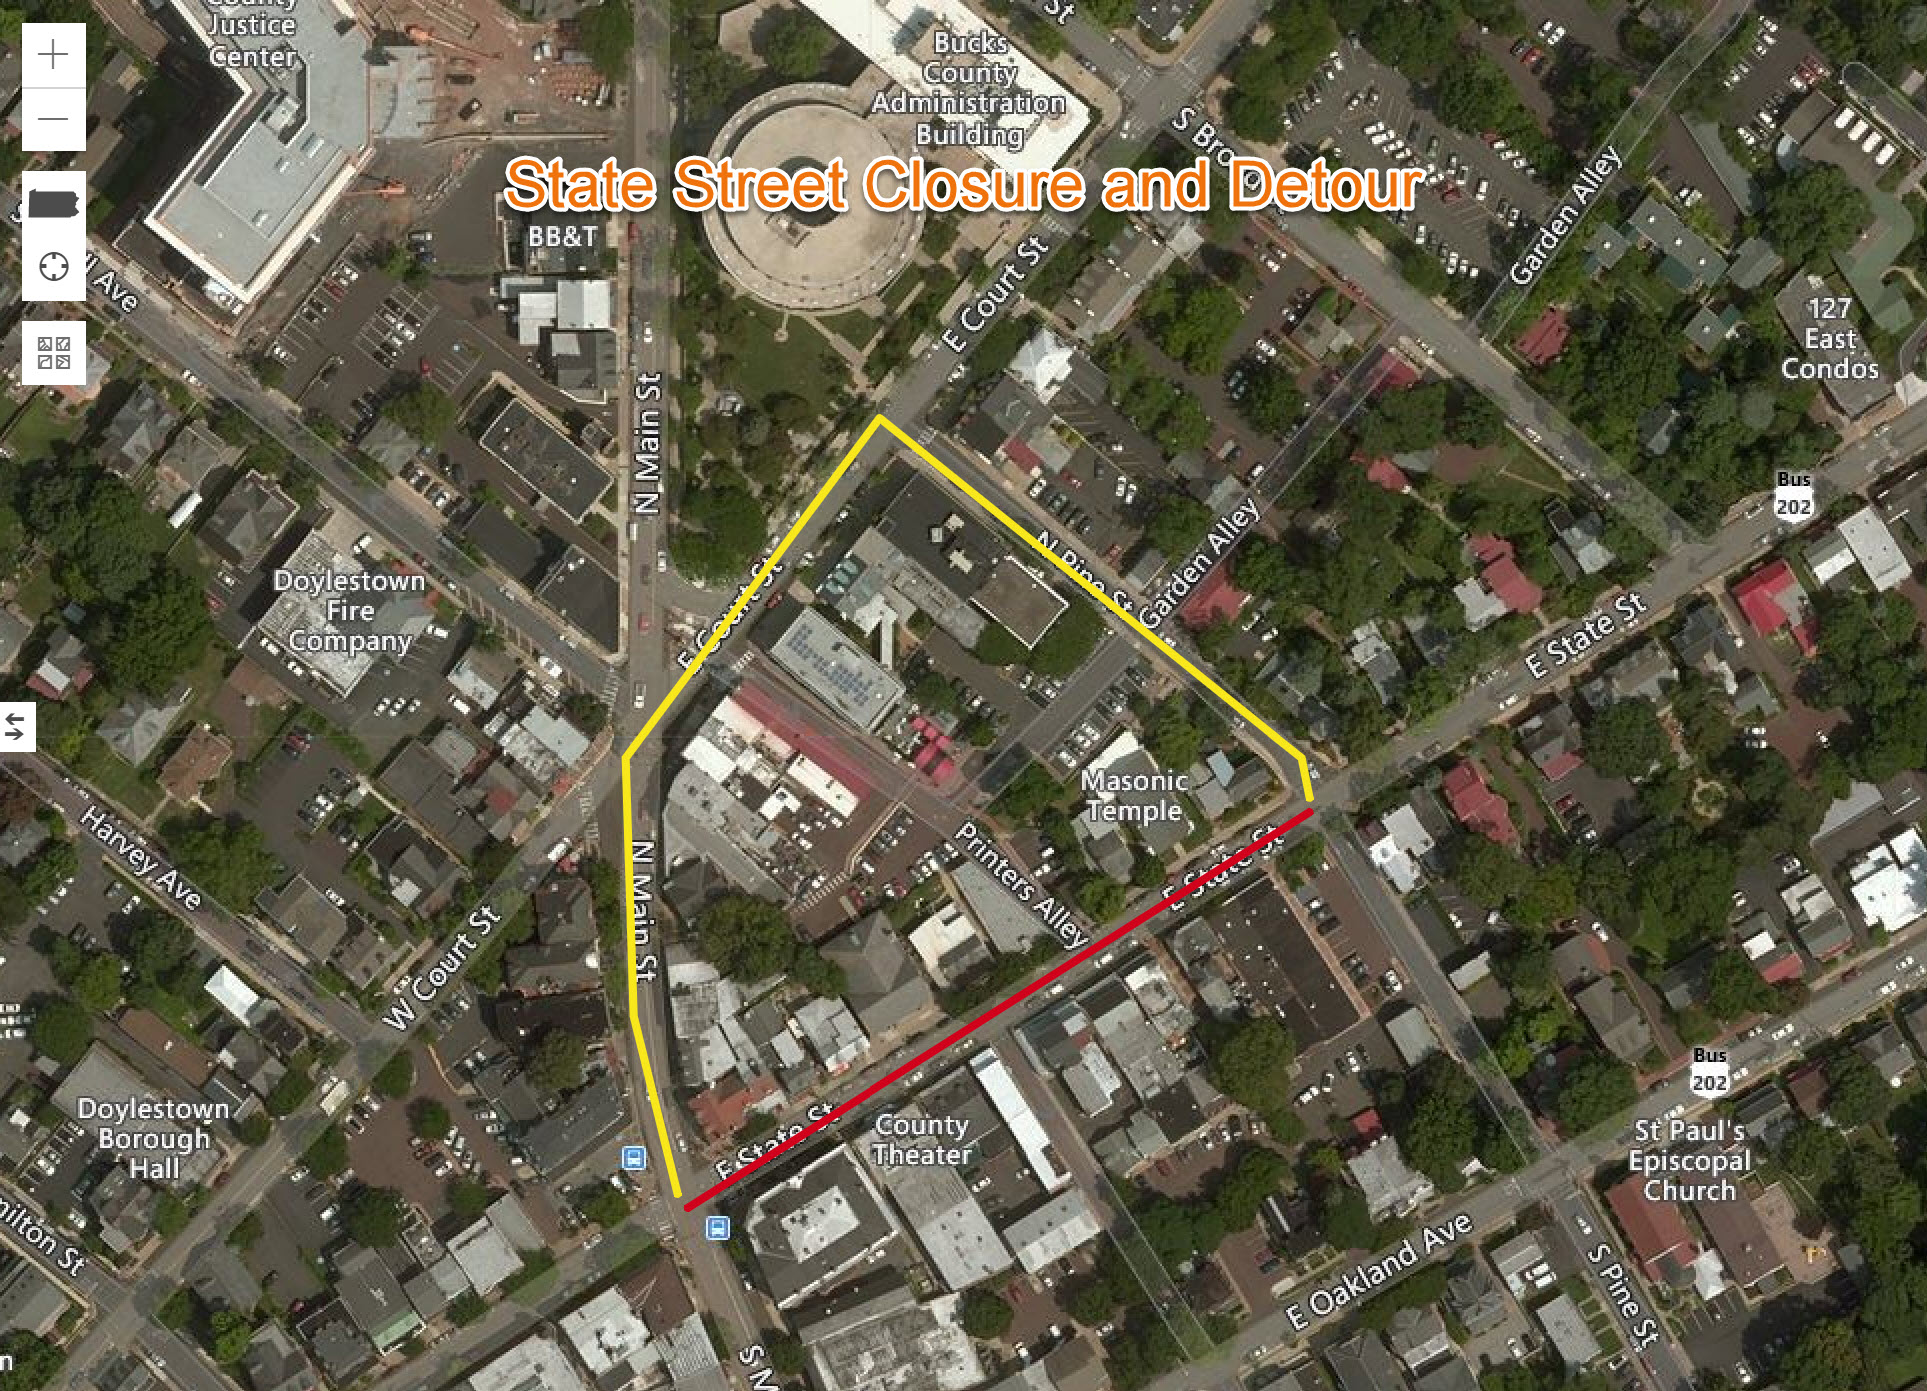 State St Closure and Detour.jpg